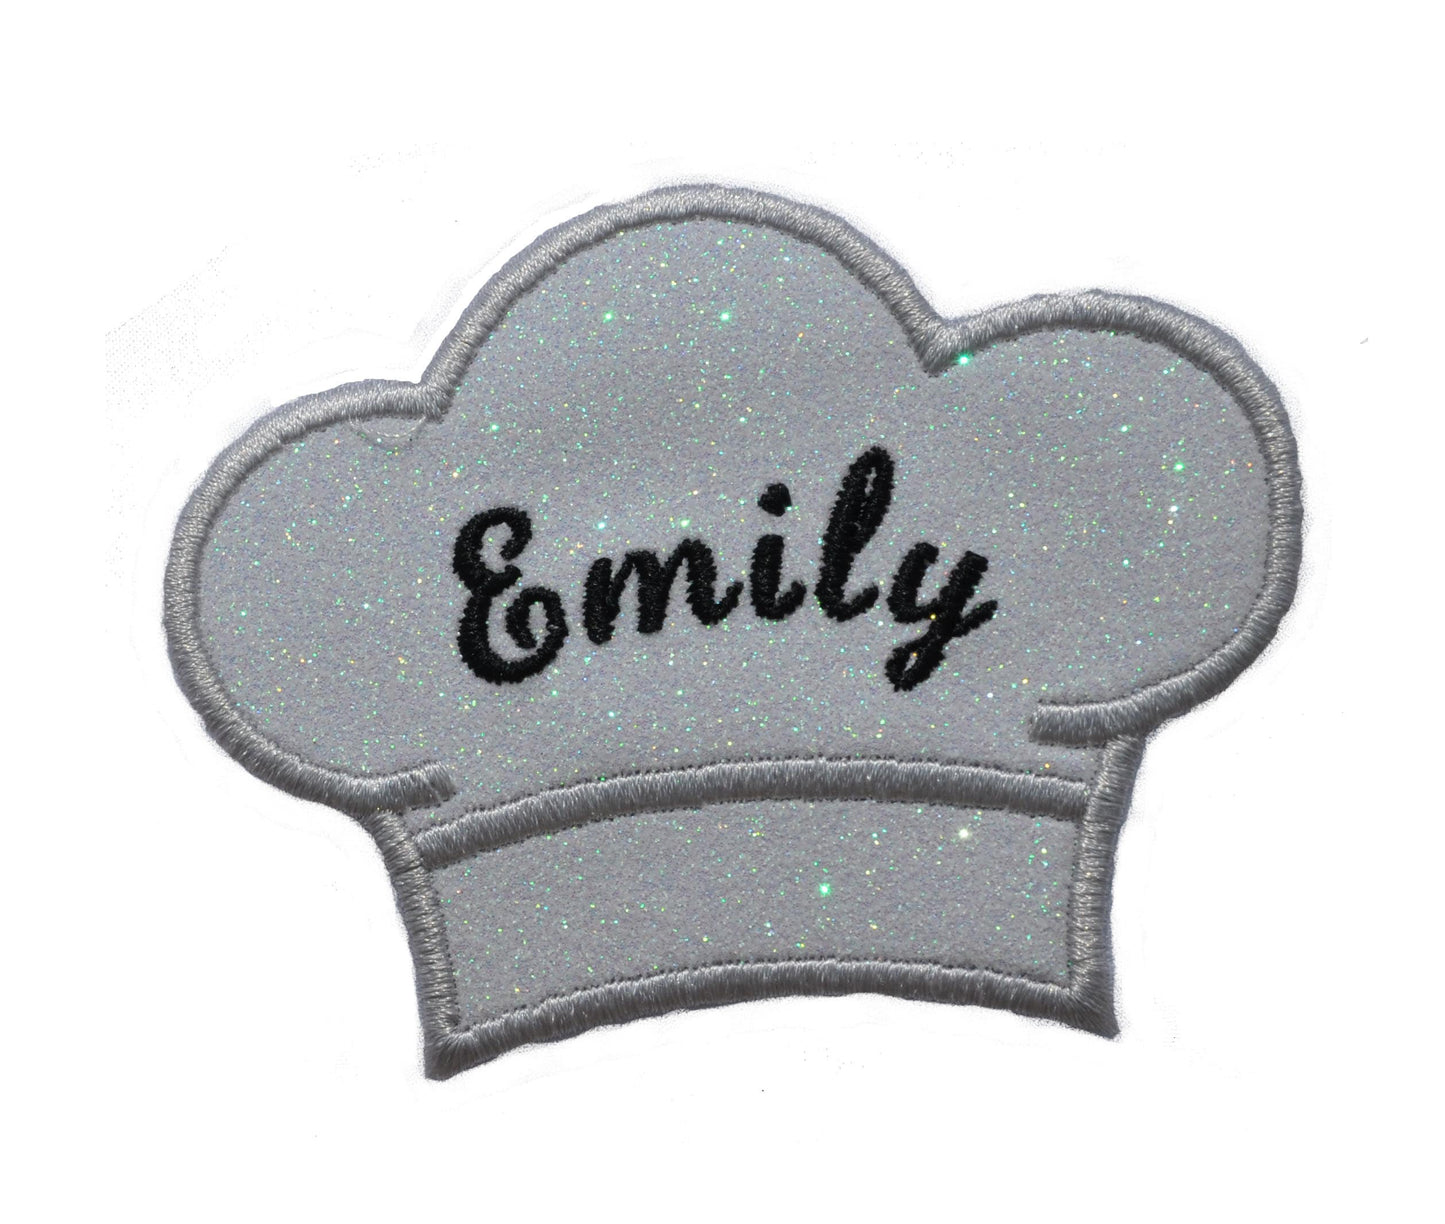 Chef&#39;s Baker Hat Toqe Blanche Gift Culinary Cook Personalized  Patch Sparkle Glitter Patch -  Iron or Sew on Vinyl - NO GLITTER MESS ! GL247